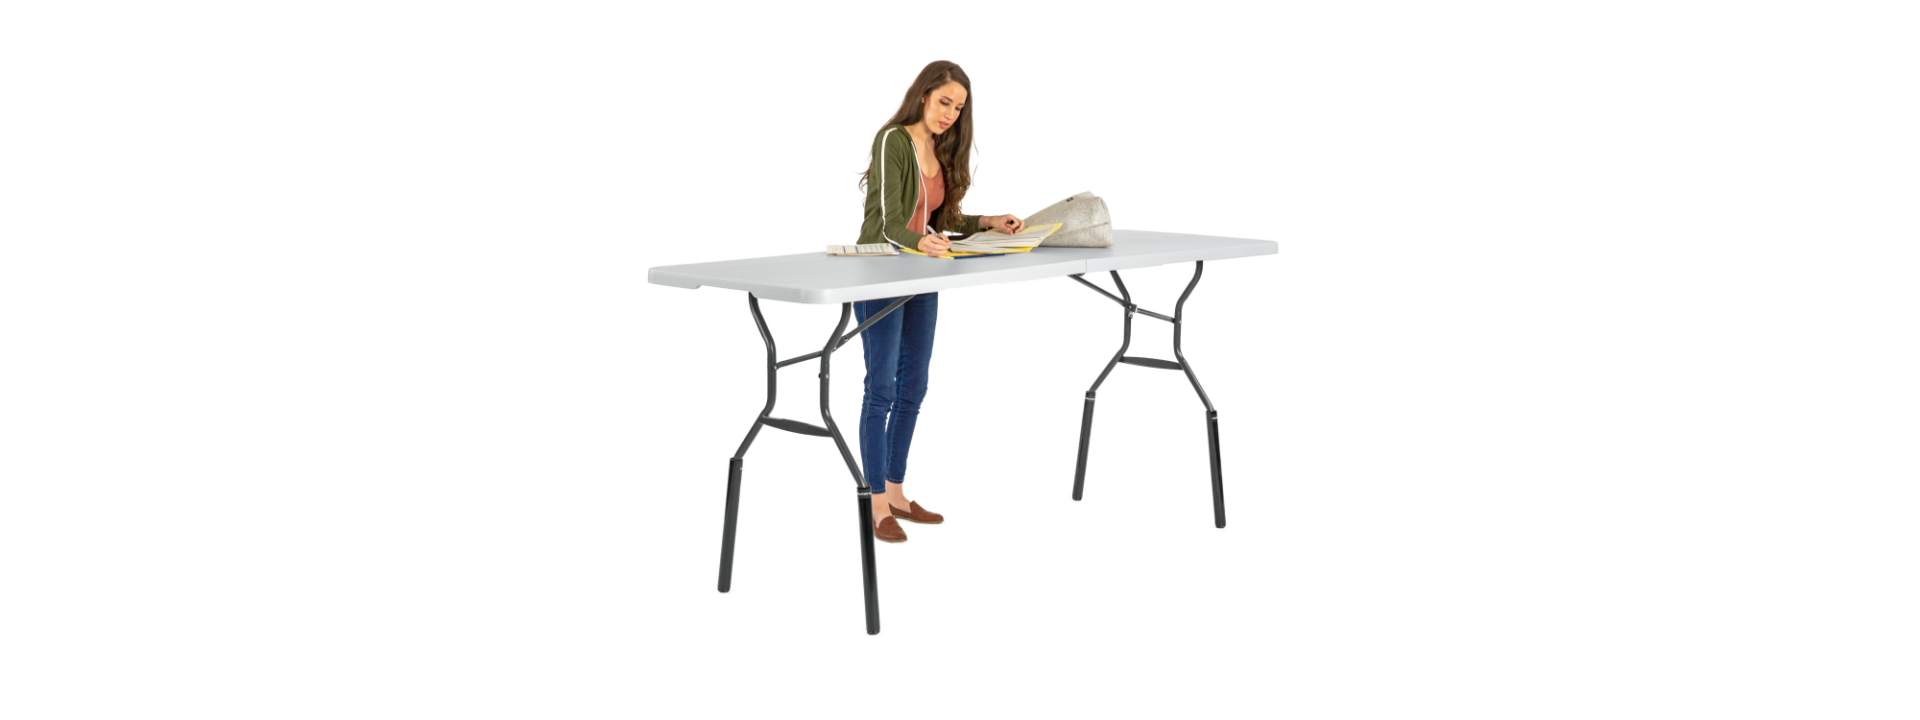 Use Lift Your Table® folding table risers Bar Height (Non-Slip Foot) or Standing Desk Kit to easily create a standing desk in your workplace.